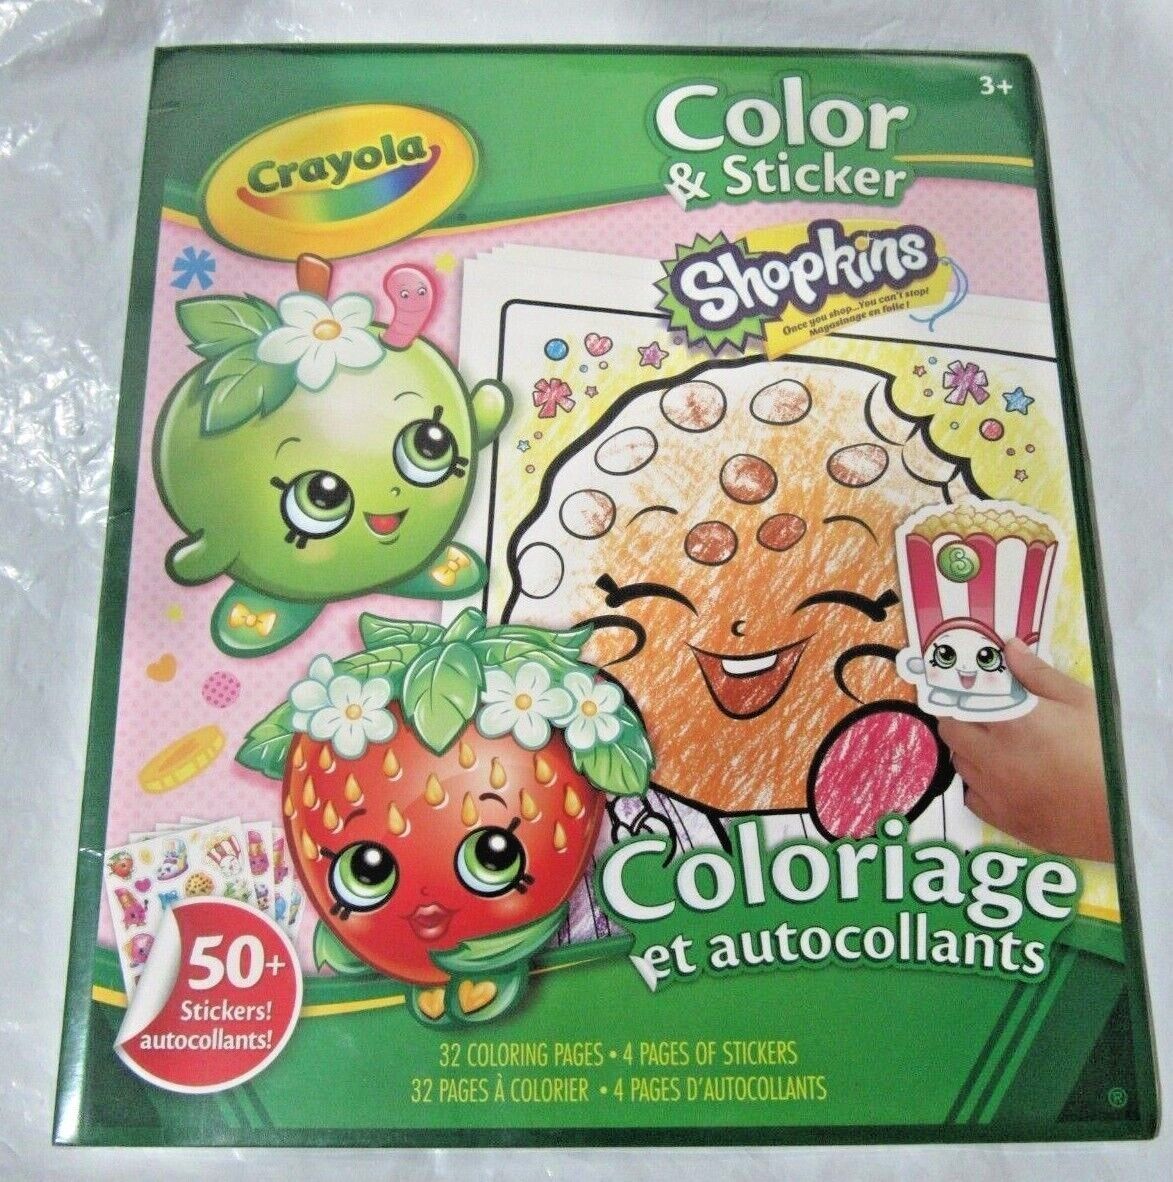 Crayola Shopkins 32 pages for Coloring and 4 pages of Stickers Moose Enterprise - $7.99